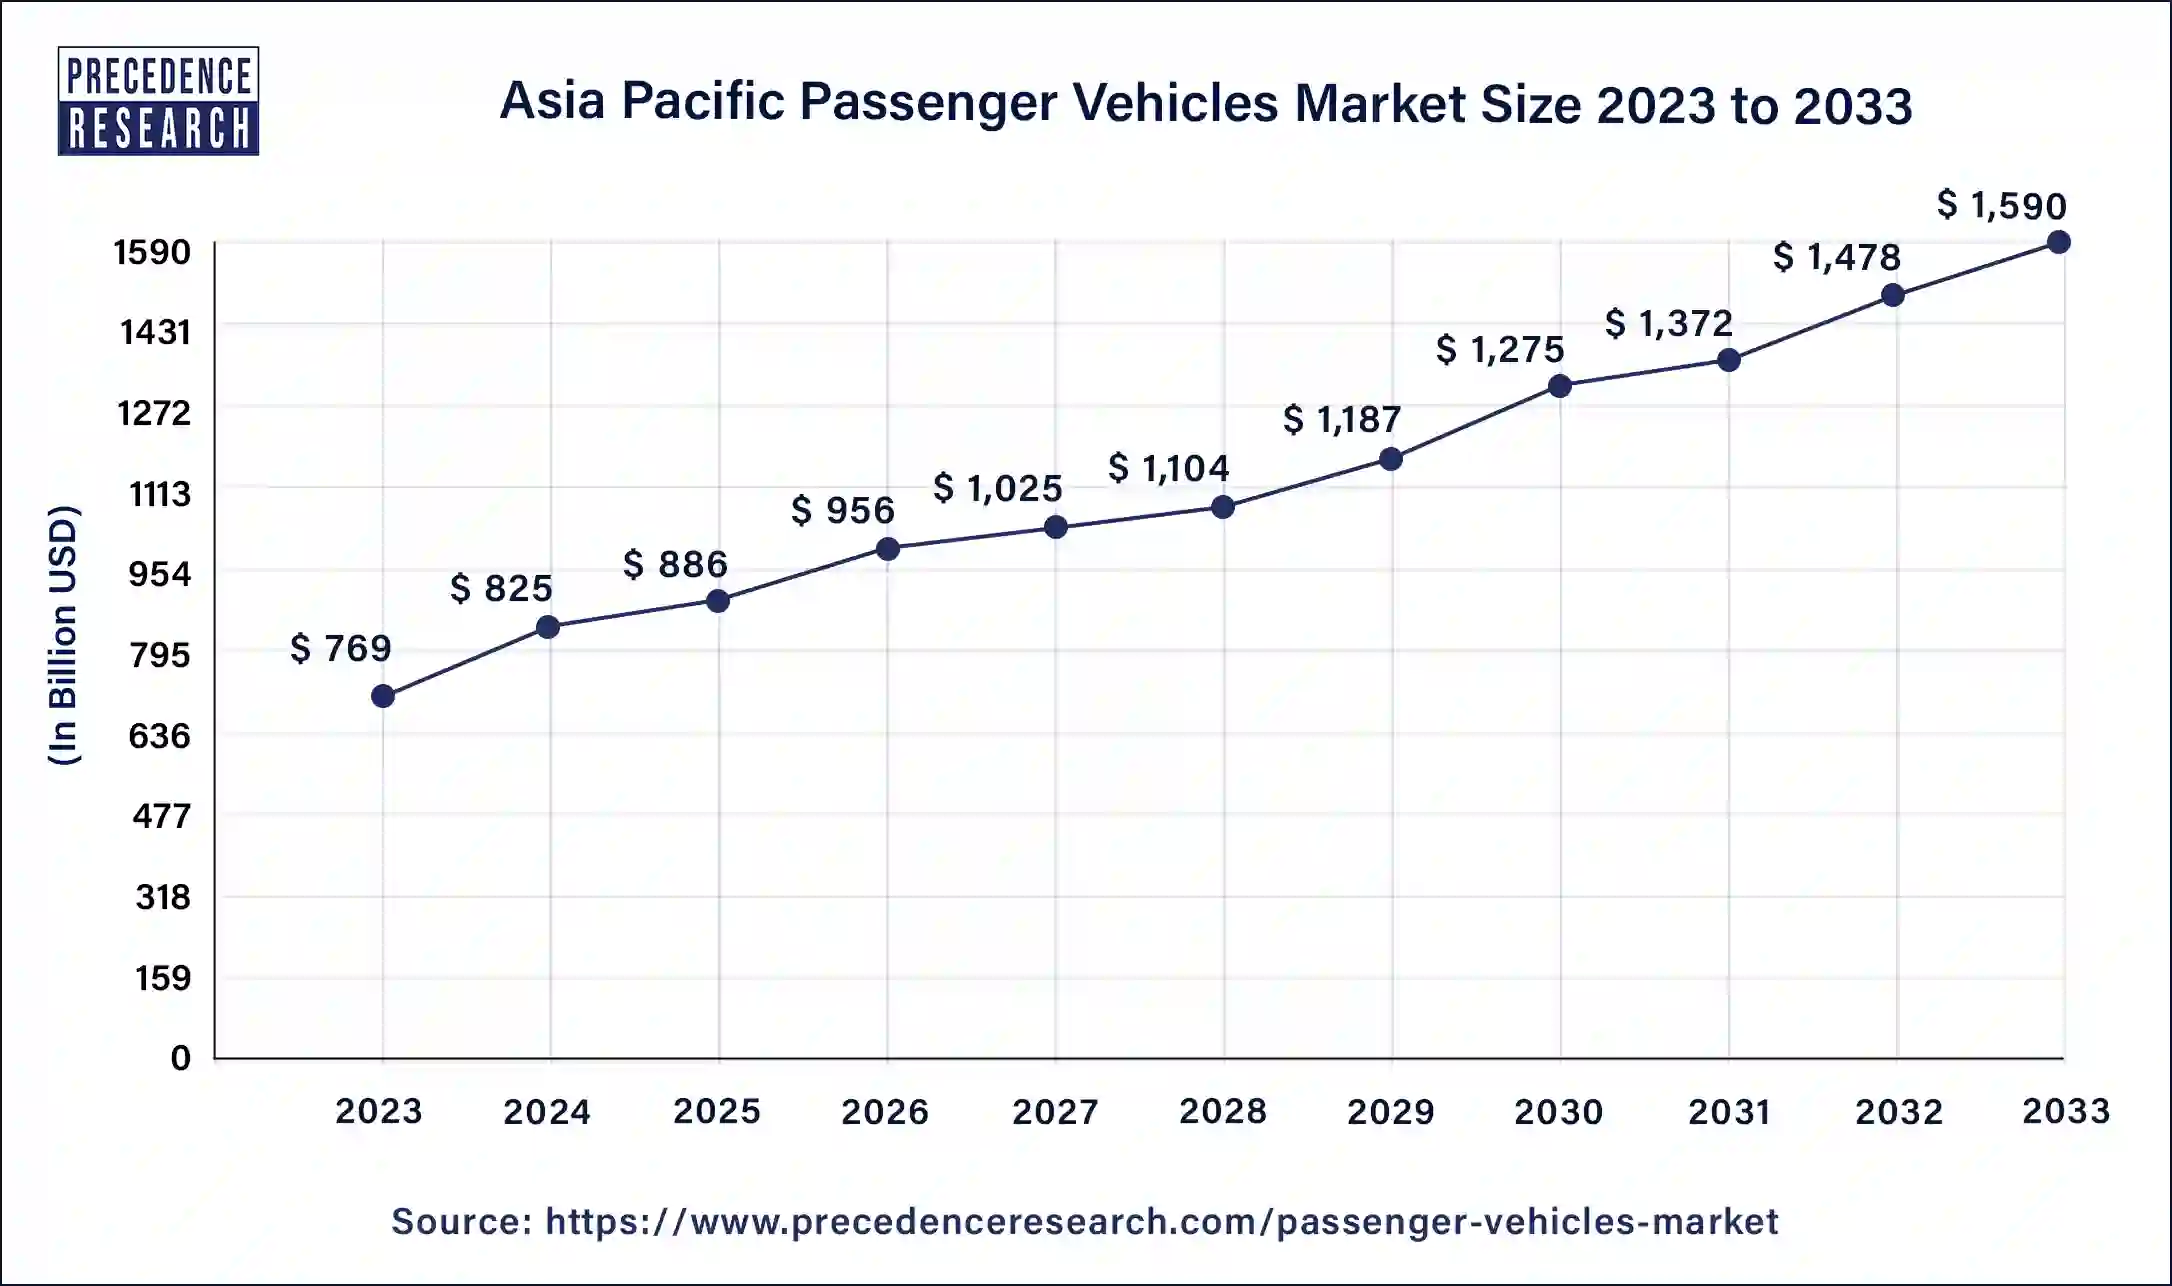 Asia Pacific Passenger Vehicles Market Size 2024 to 2033